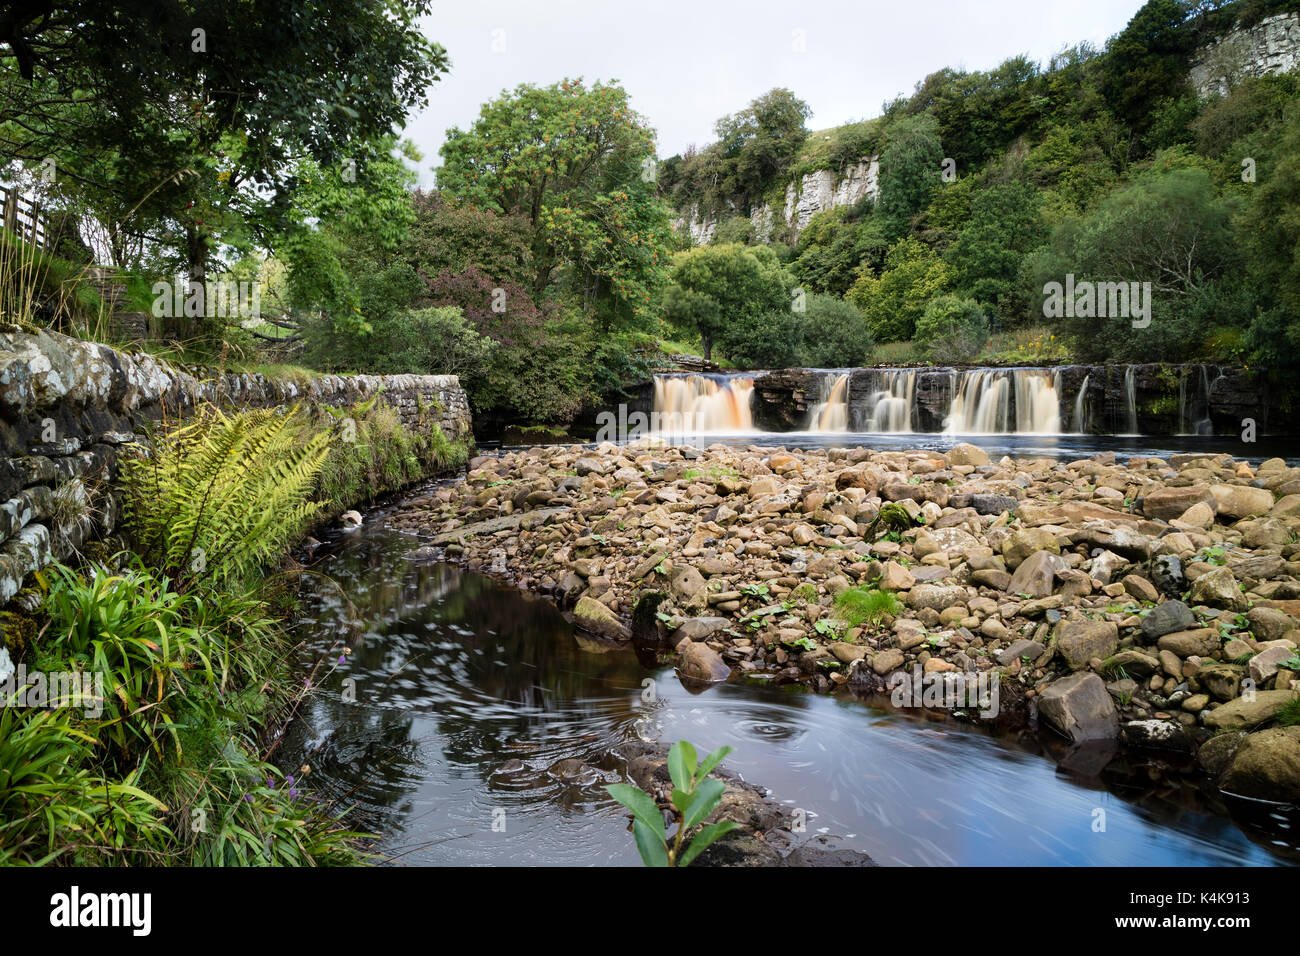 River Swale, Keld, Yorkshire Dales.  Wednesday 6th September 2017. UK Weather.  After a damp start the sun breaks through to illuminate Wain Wath Falls on the River Swale near the village of Keld. Credit: David Forster/Alamy Live News. Stock Photo